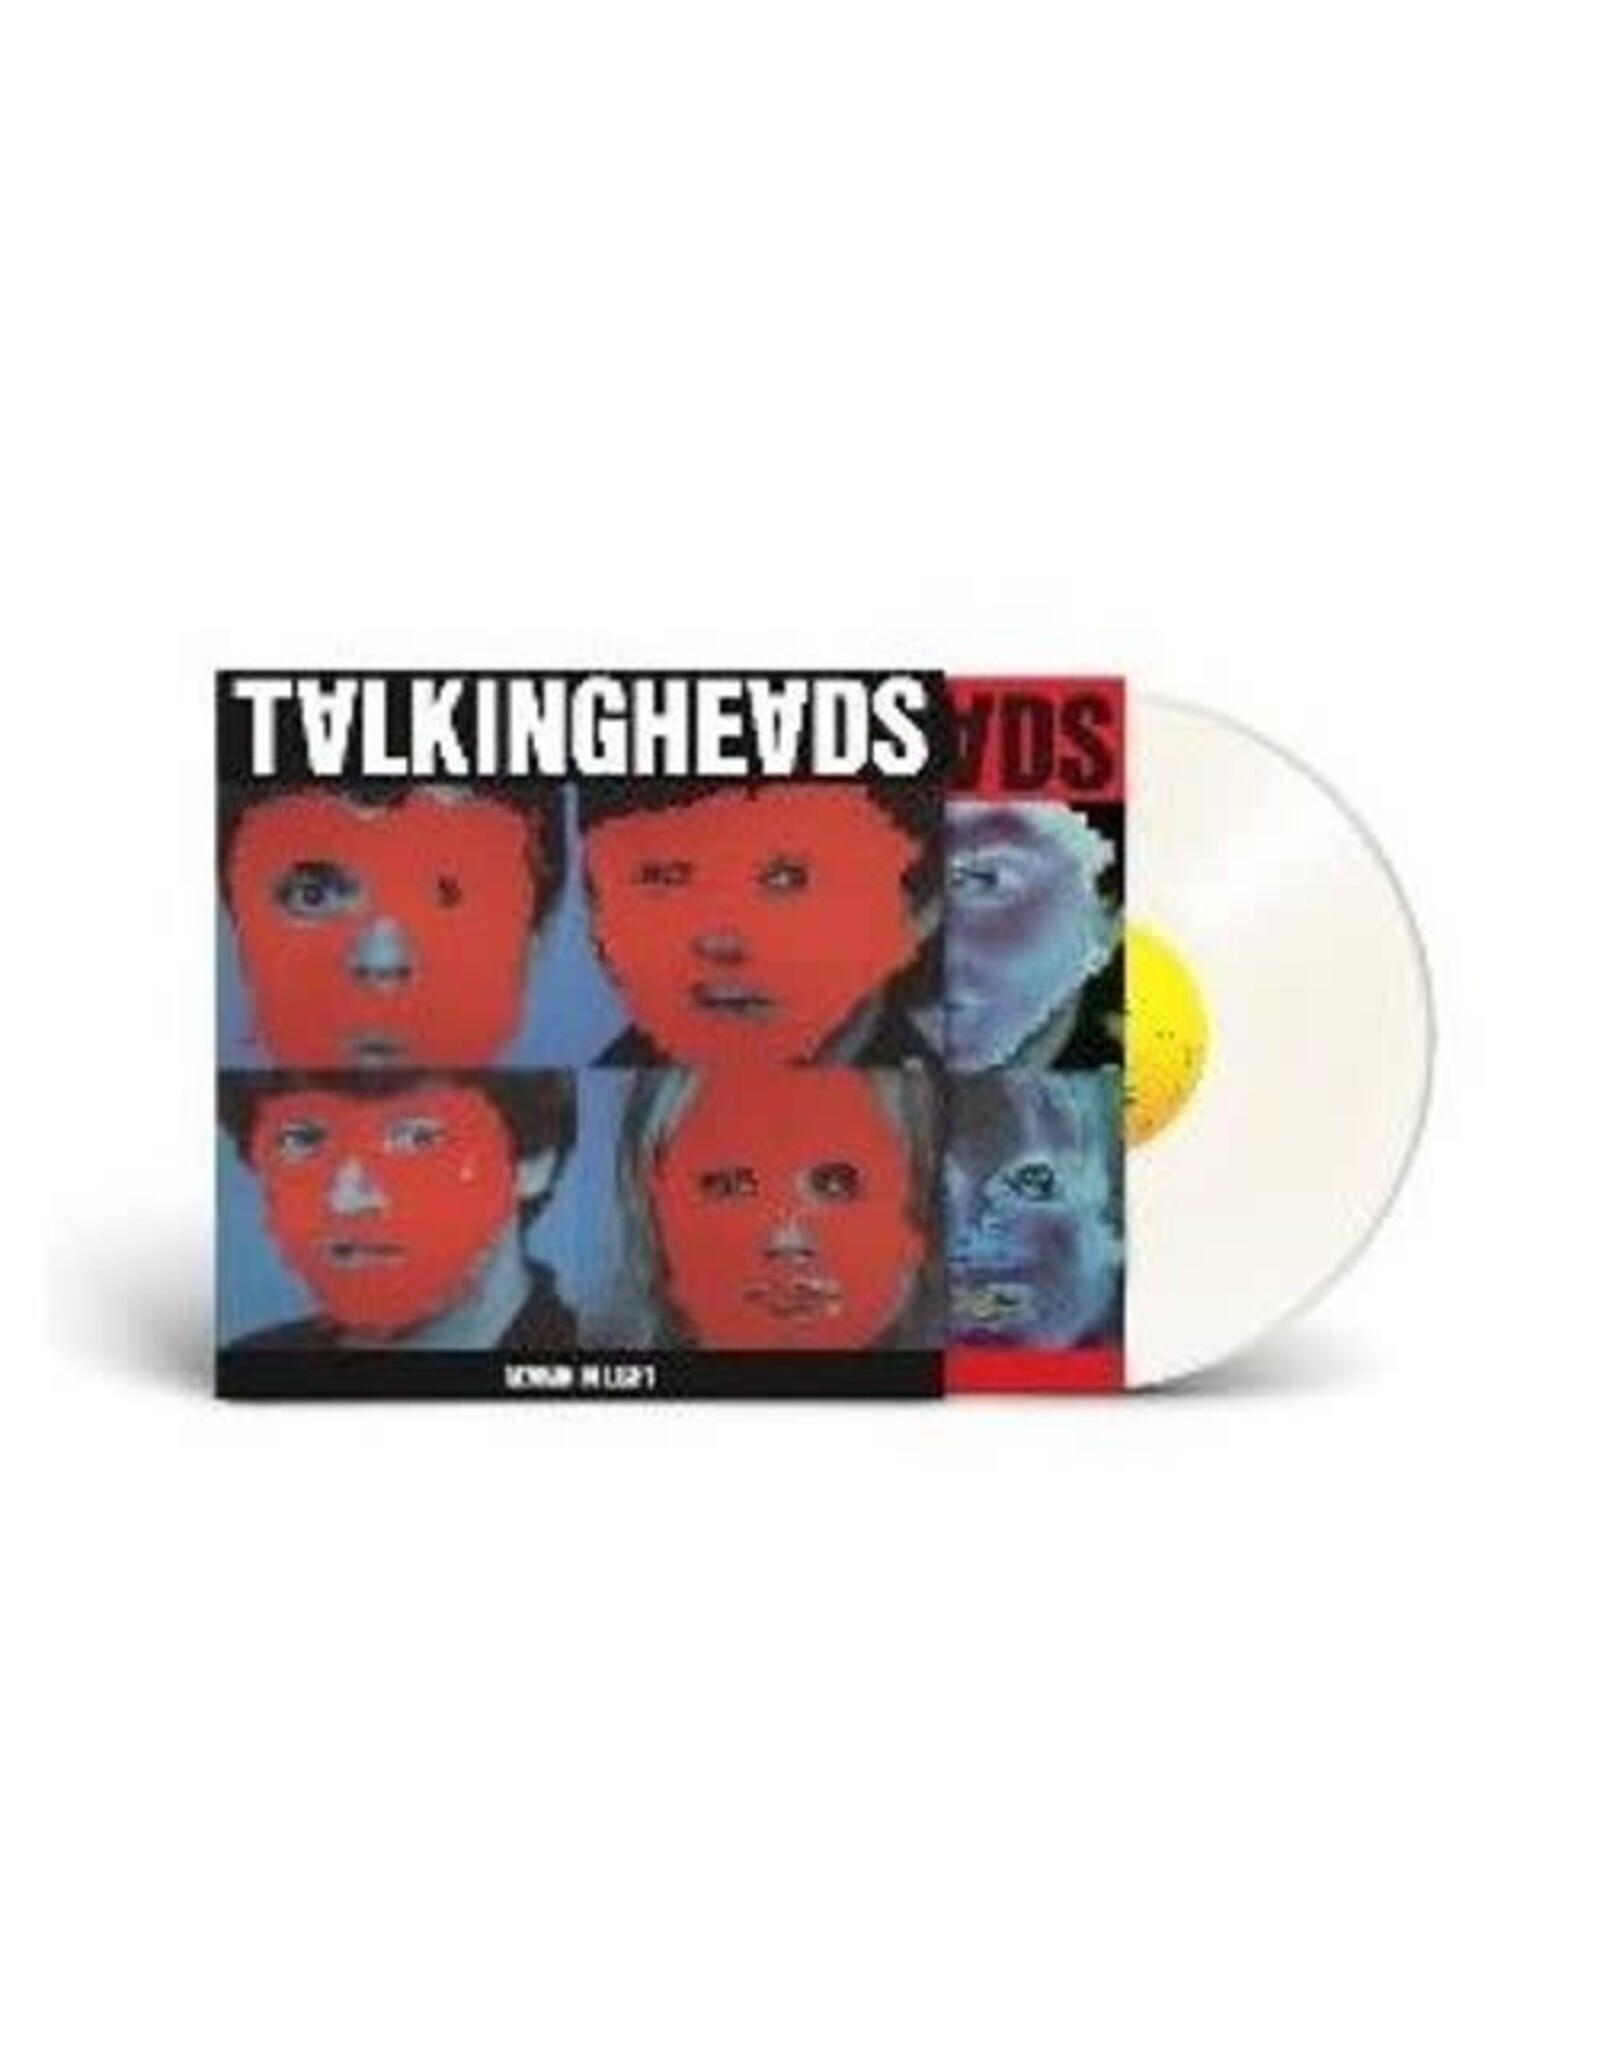 Rhino Talking Heads: Remain In Light (Rocktober Exclusive) [Solid White] LP